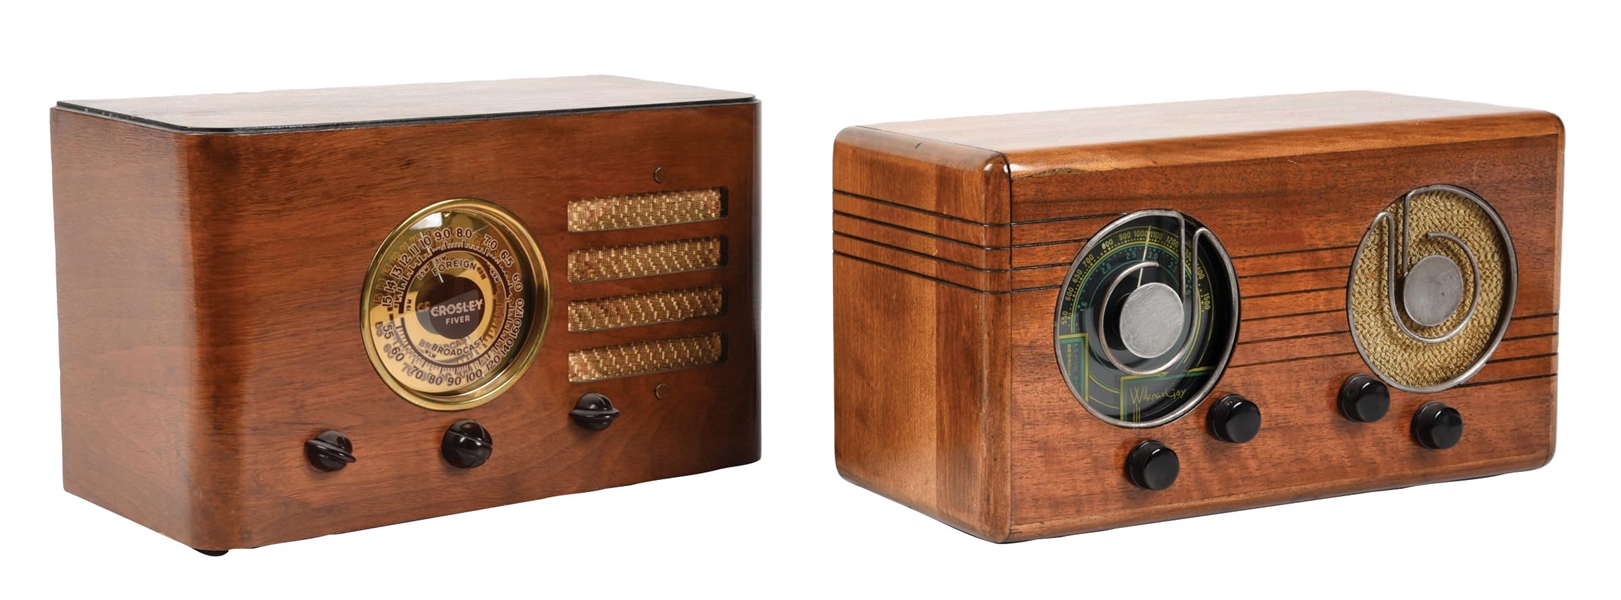 COLLECTION OF 2 EARLY WOODEN RADIOS